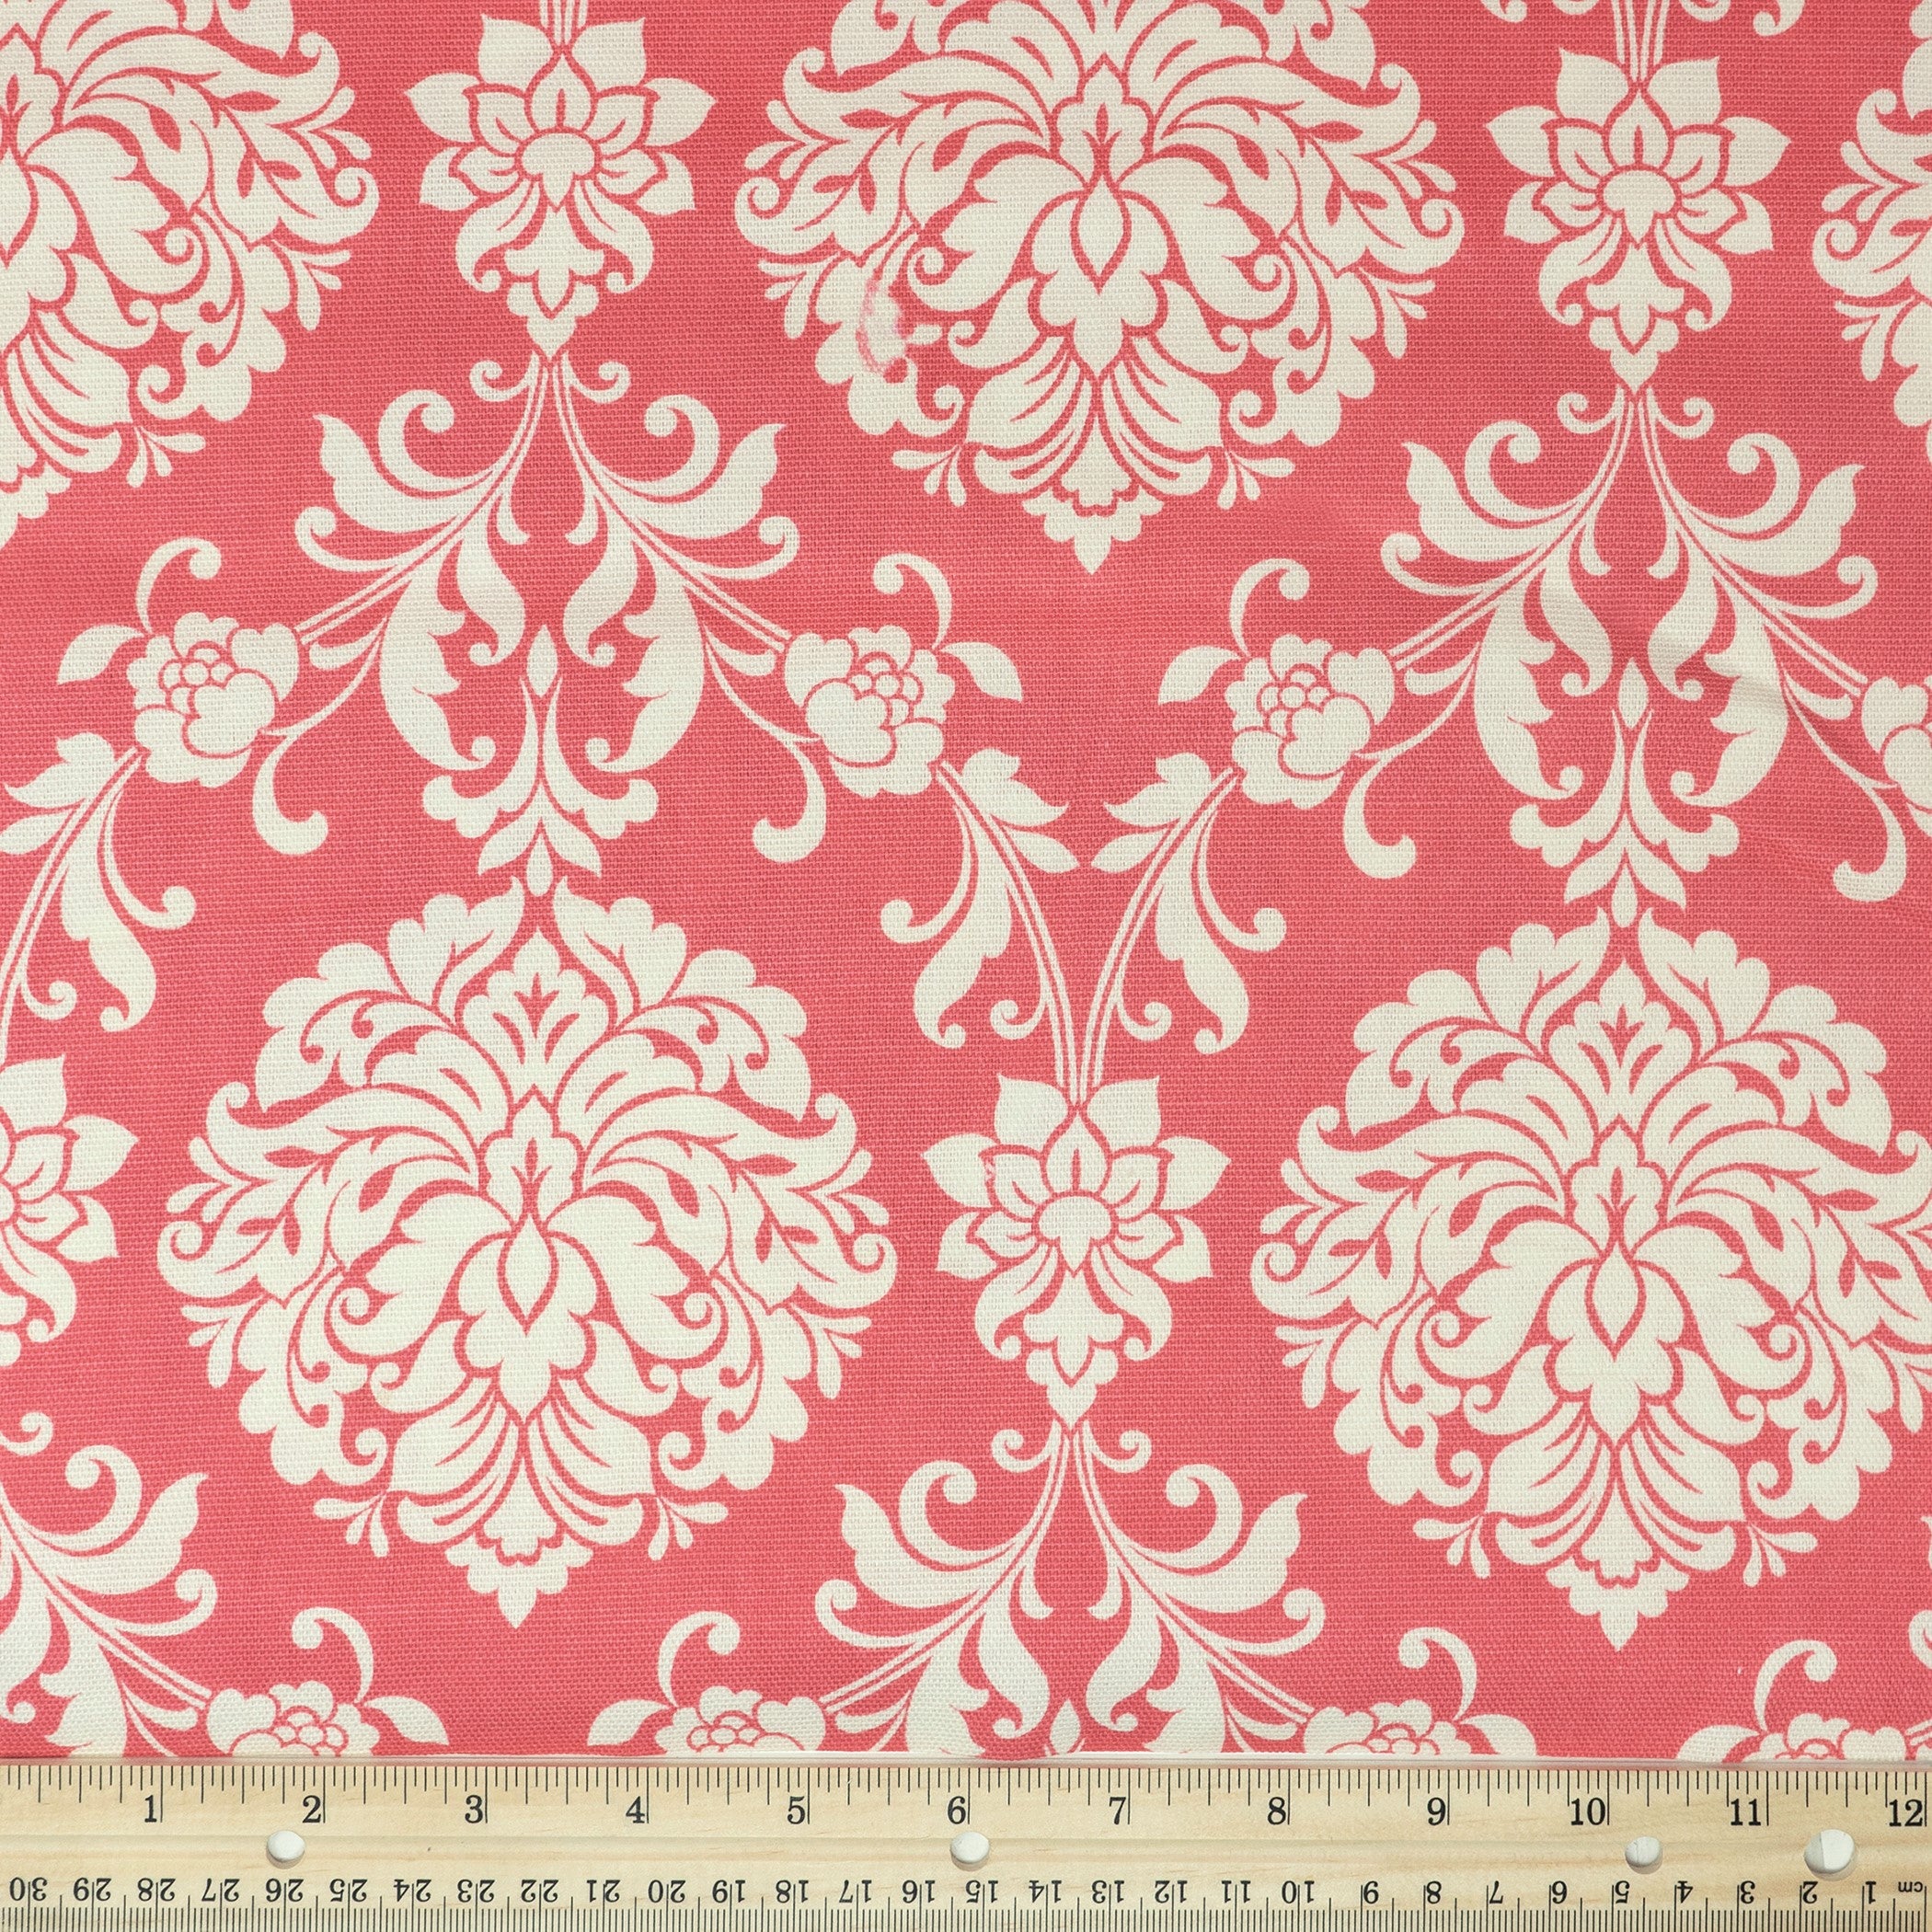 Waverly Inspirations 100% Cotton Duck 45" Width Small Damask Coral Color Sewing Fabric by the Yard